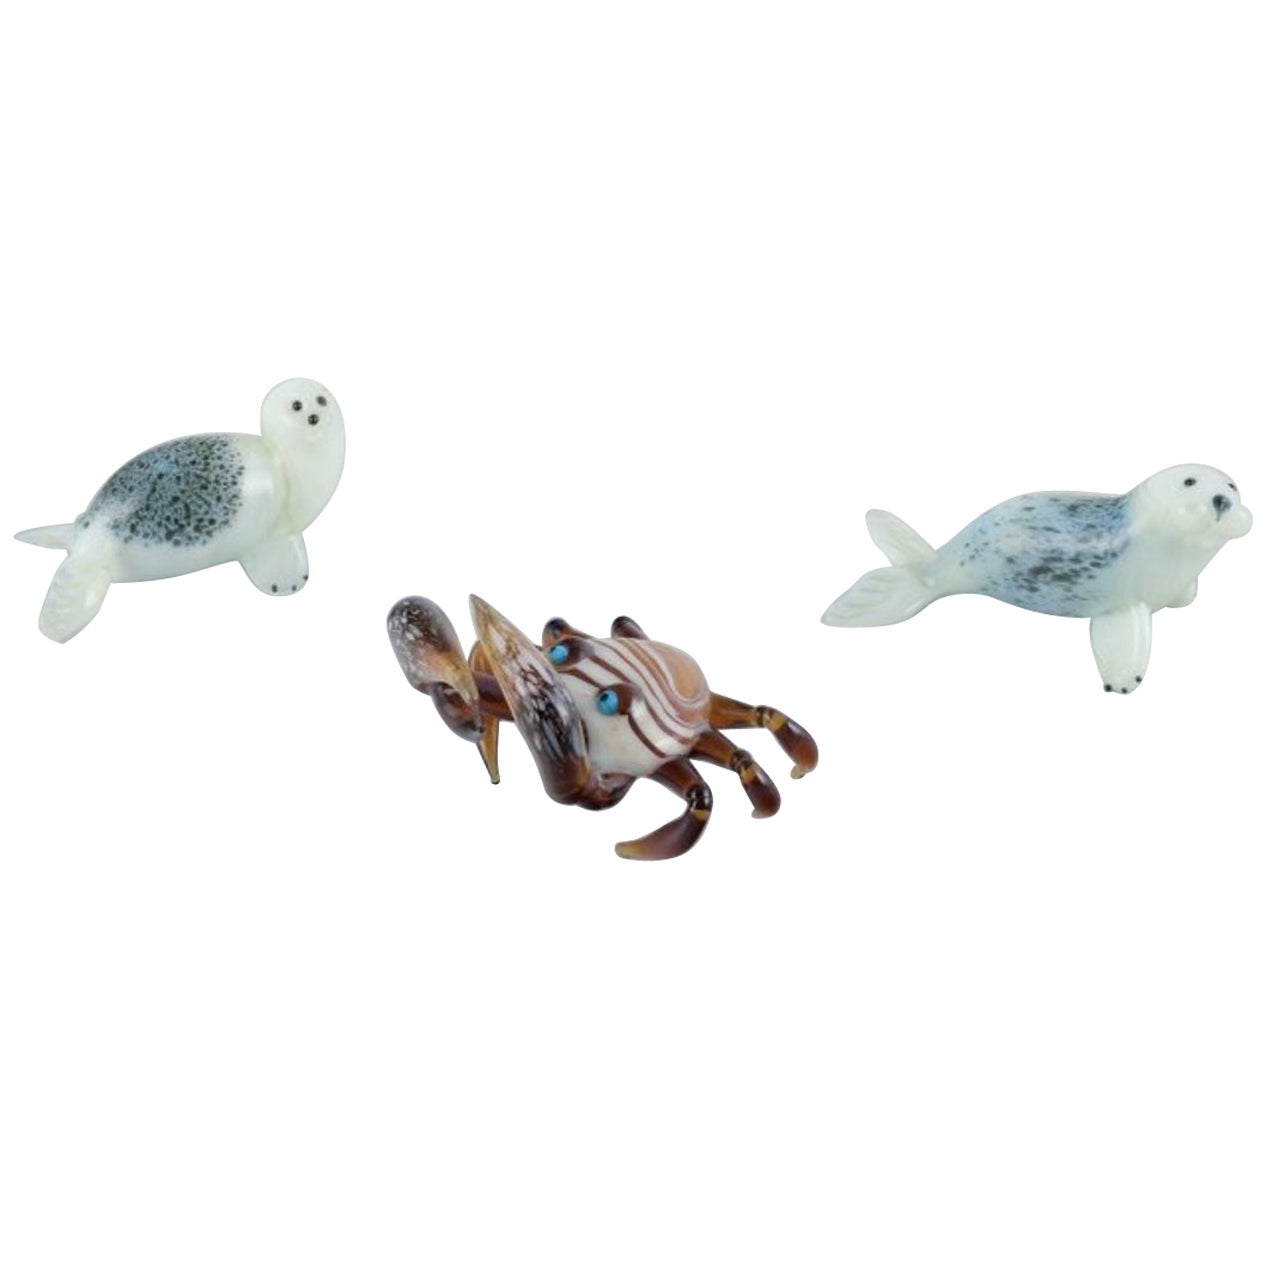 Murano, Italy. Three miniature glass animal figurines. Two seals and a crab.